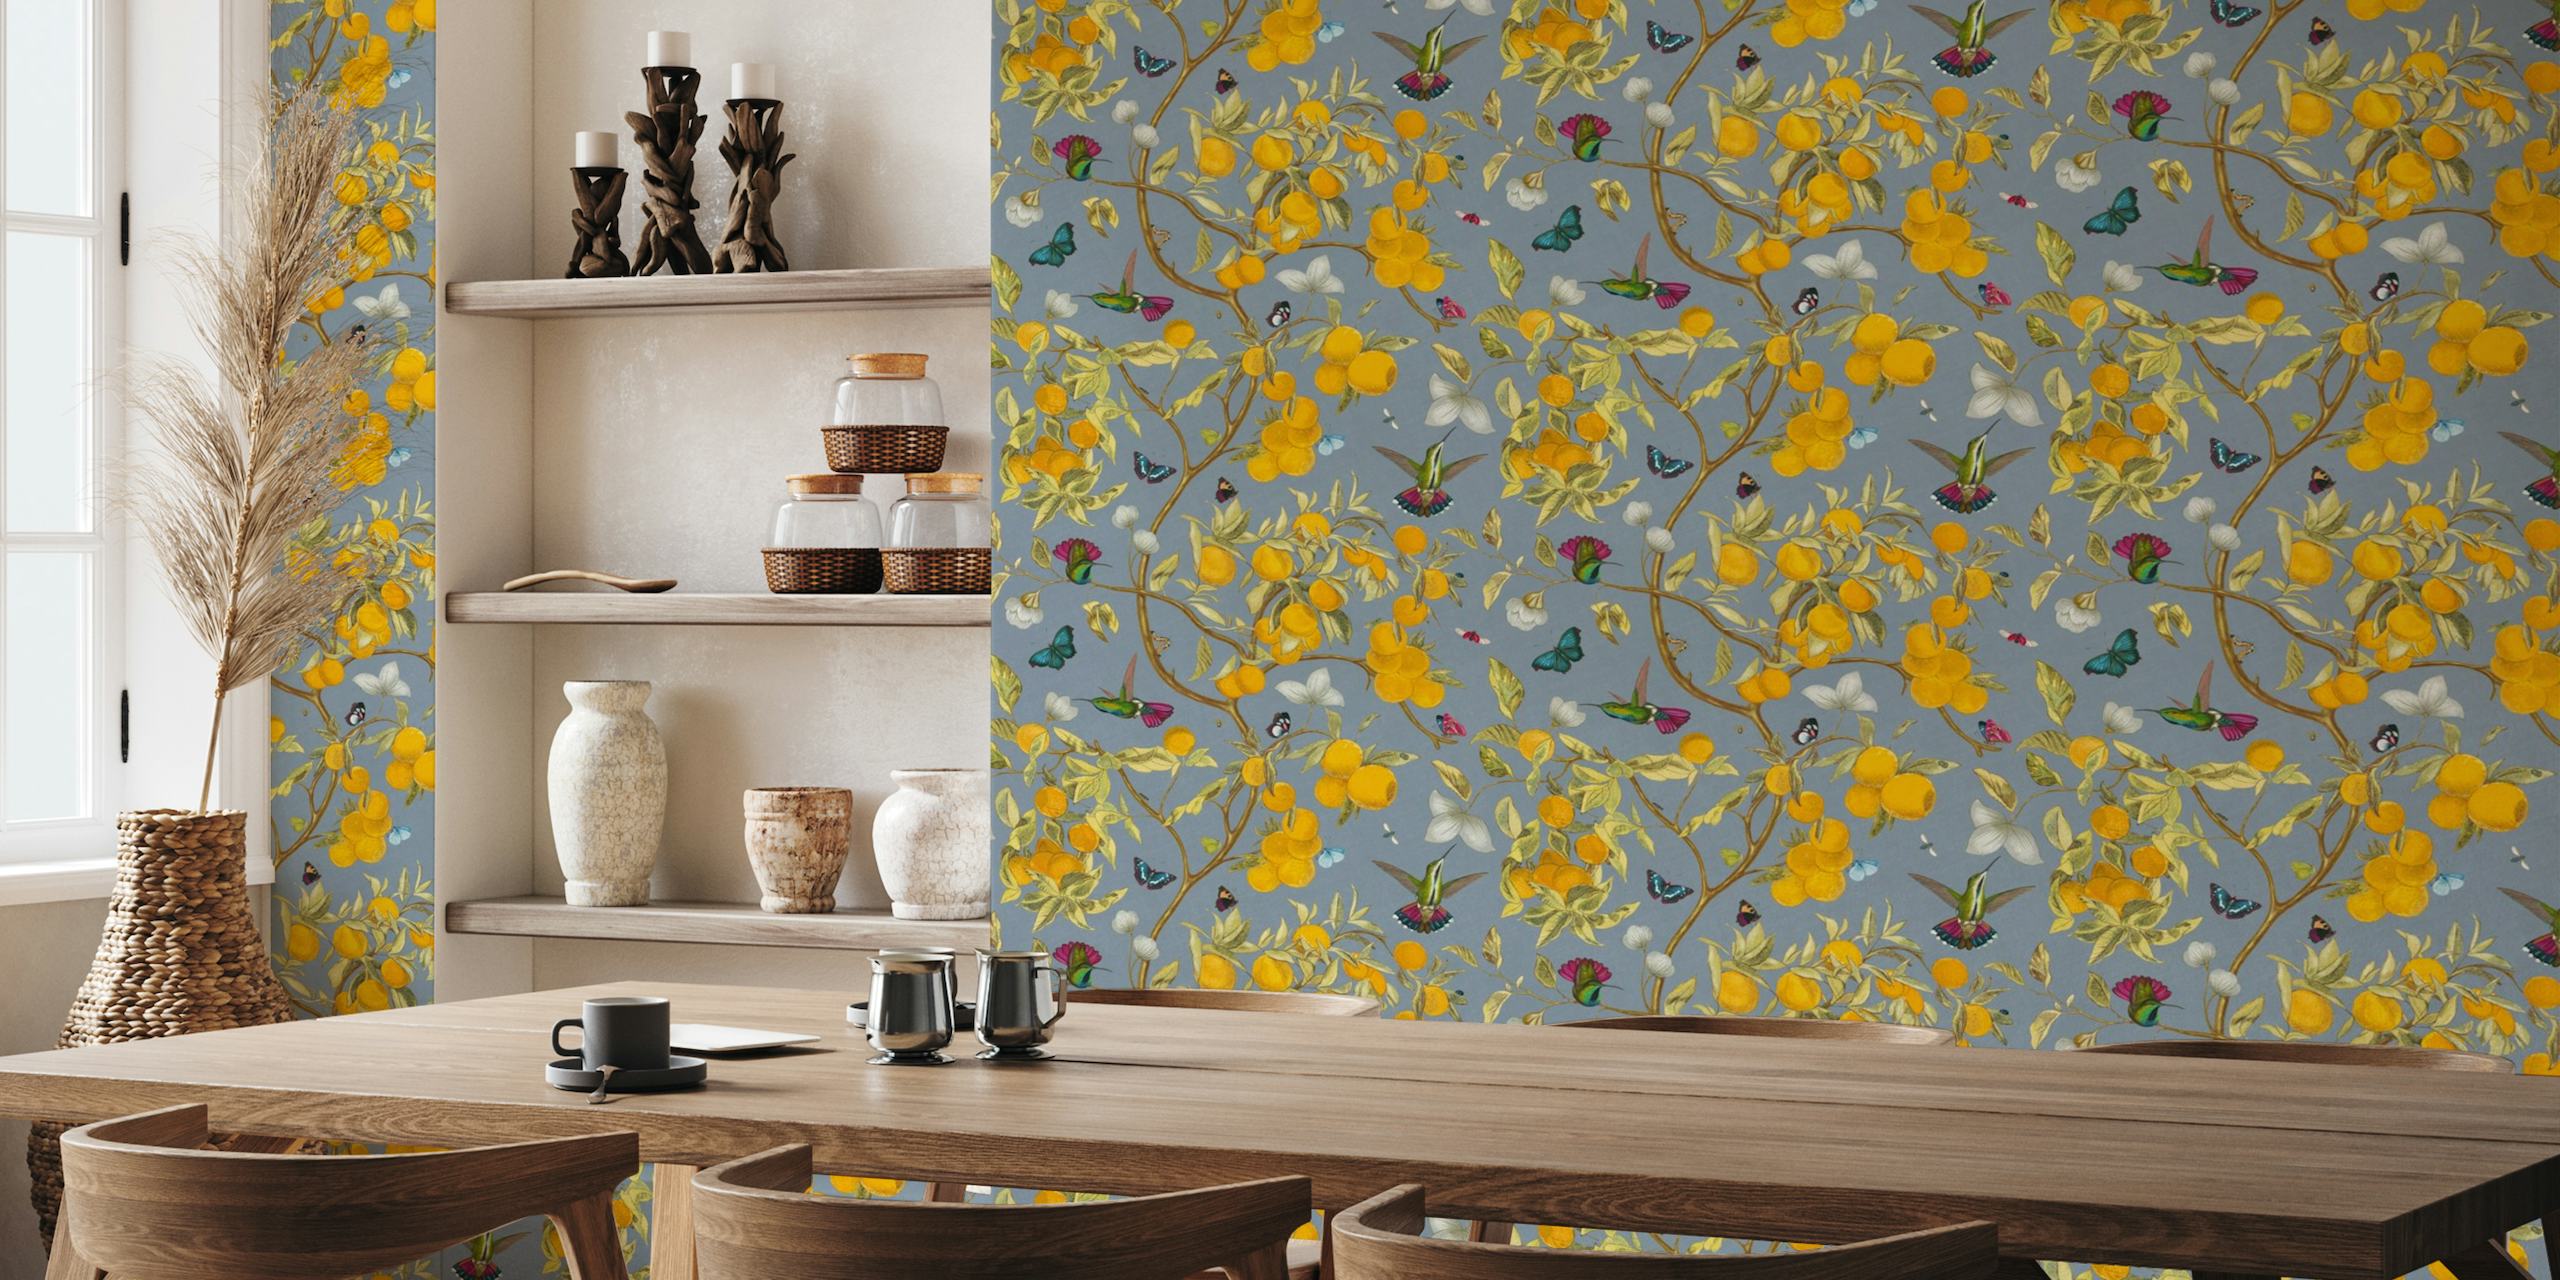 A wall mural with hummingbirds, yellow lemons, and butterflies on a slate background